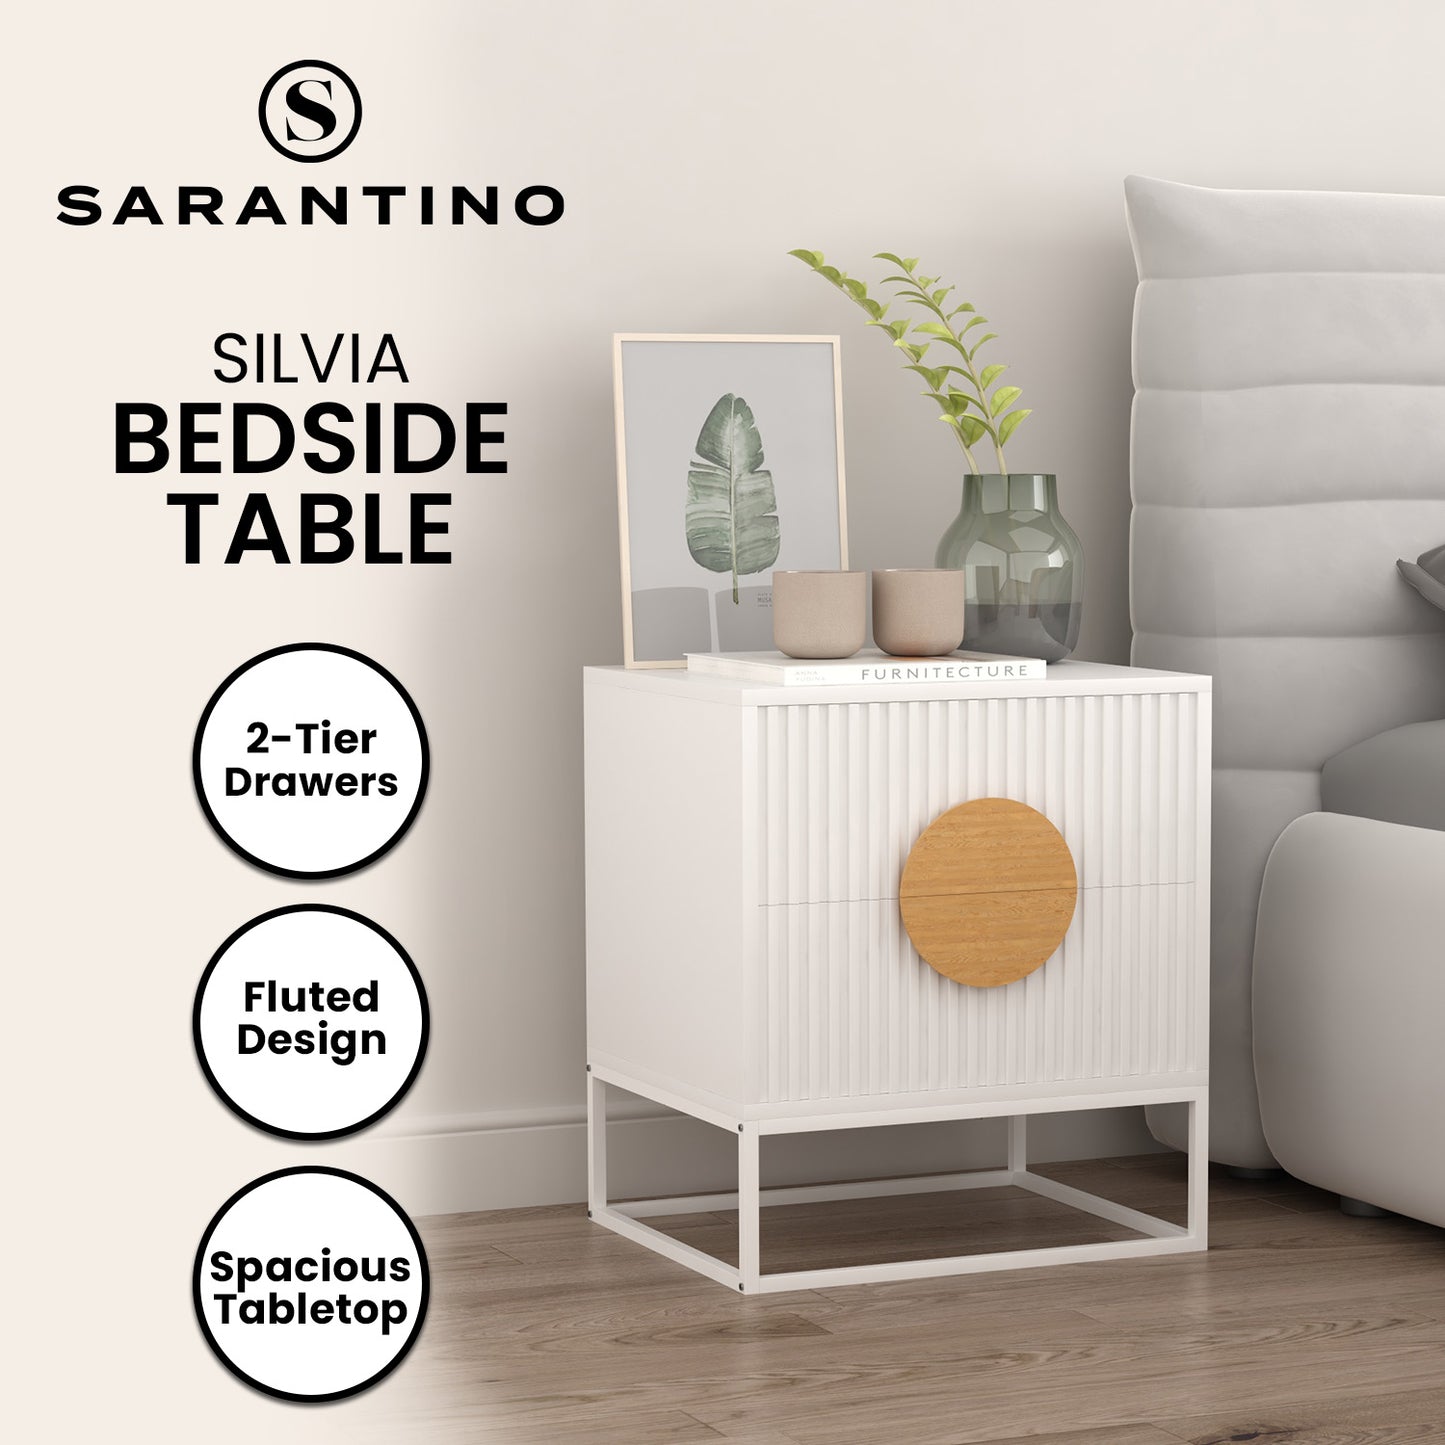 Sarantino Silvia Bedside Table with 2 Drawers - White